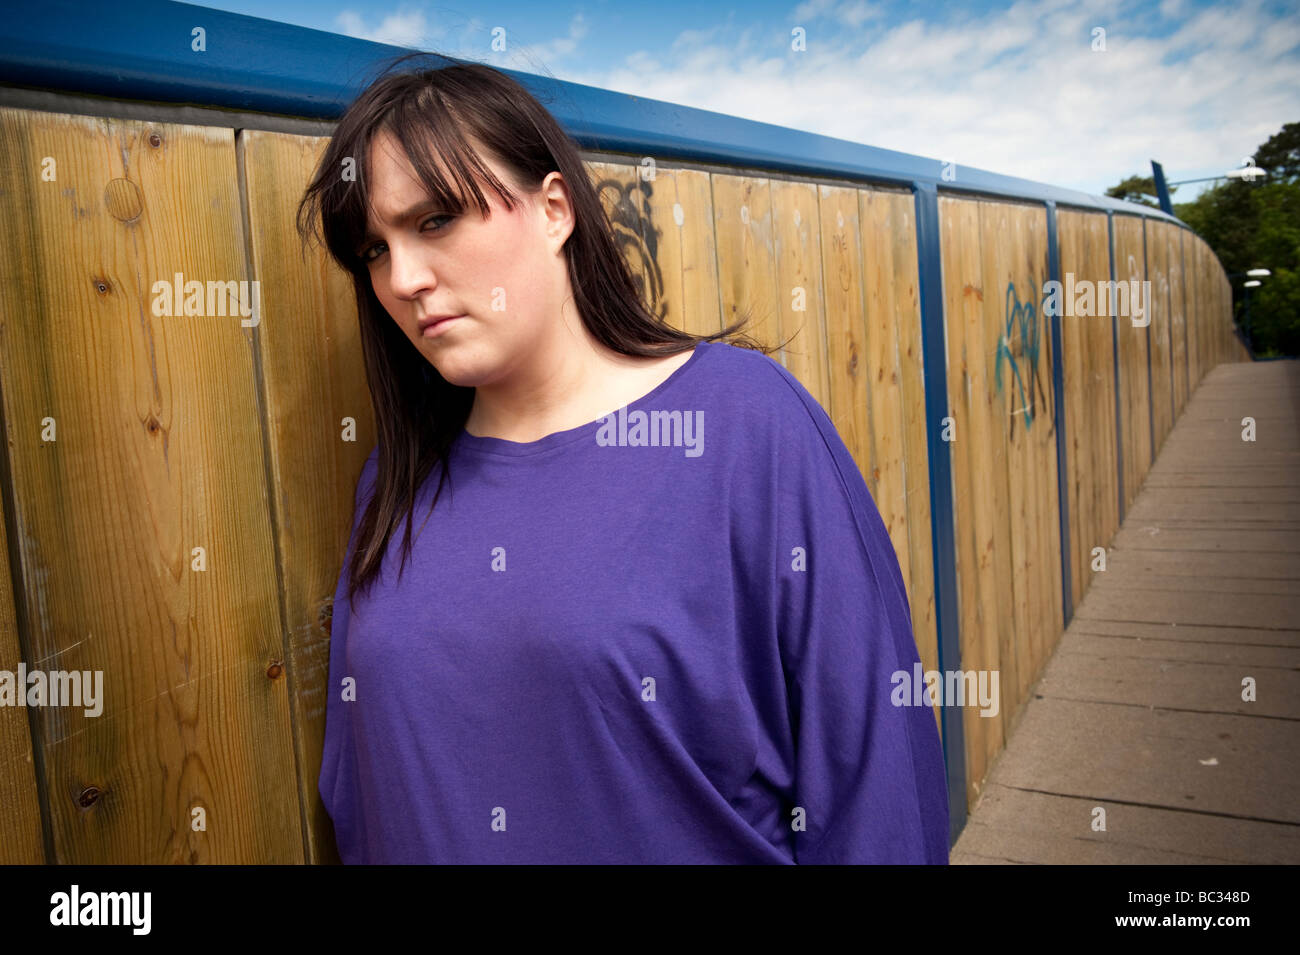 Sad depressed young overweight woman 18 to 21 year old standing on walkway bridge Stock Photo